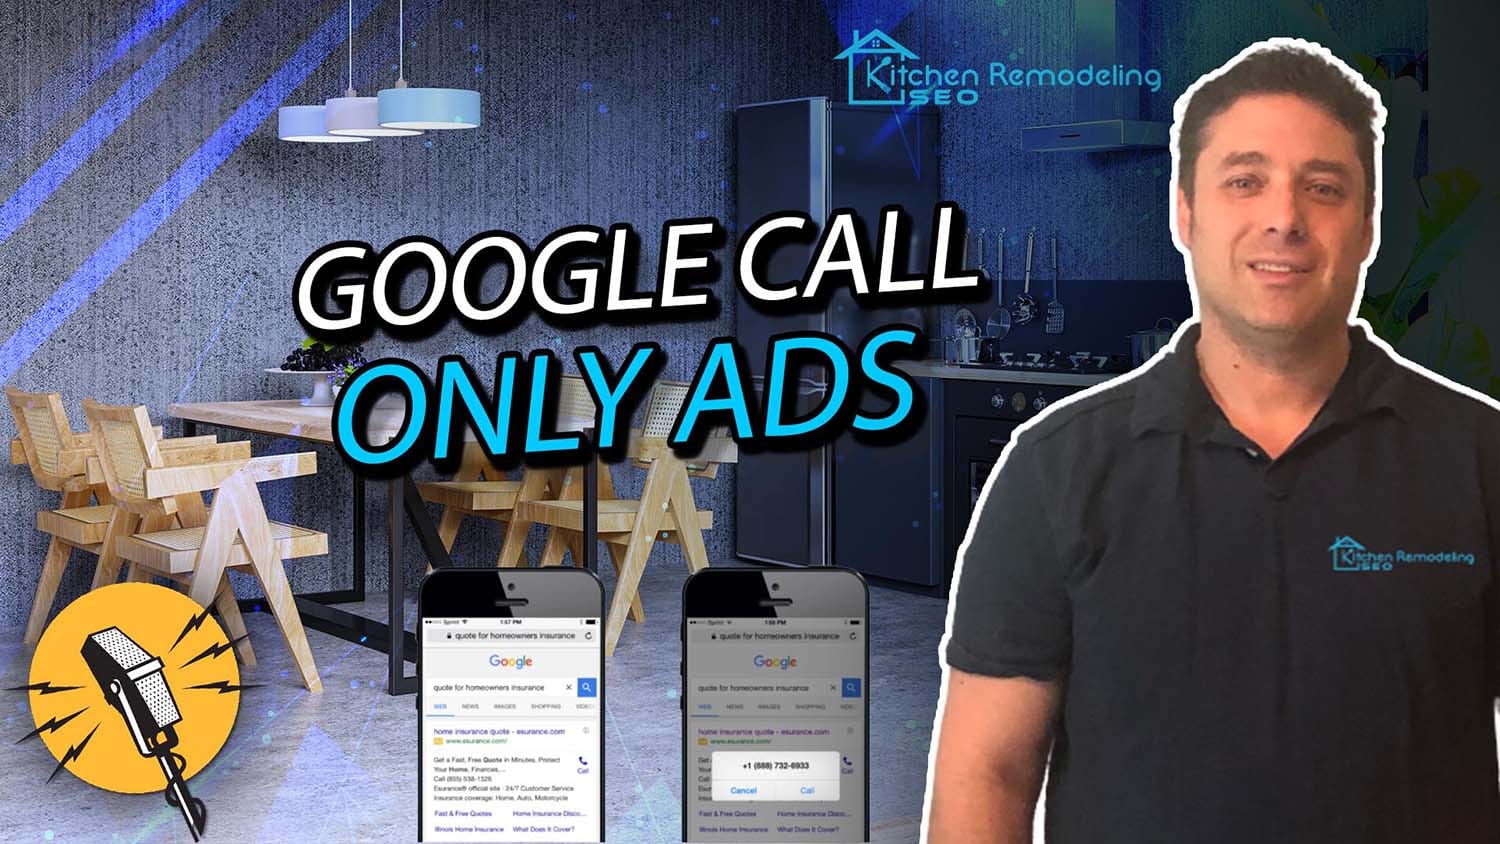 Google Call Only Ads